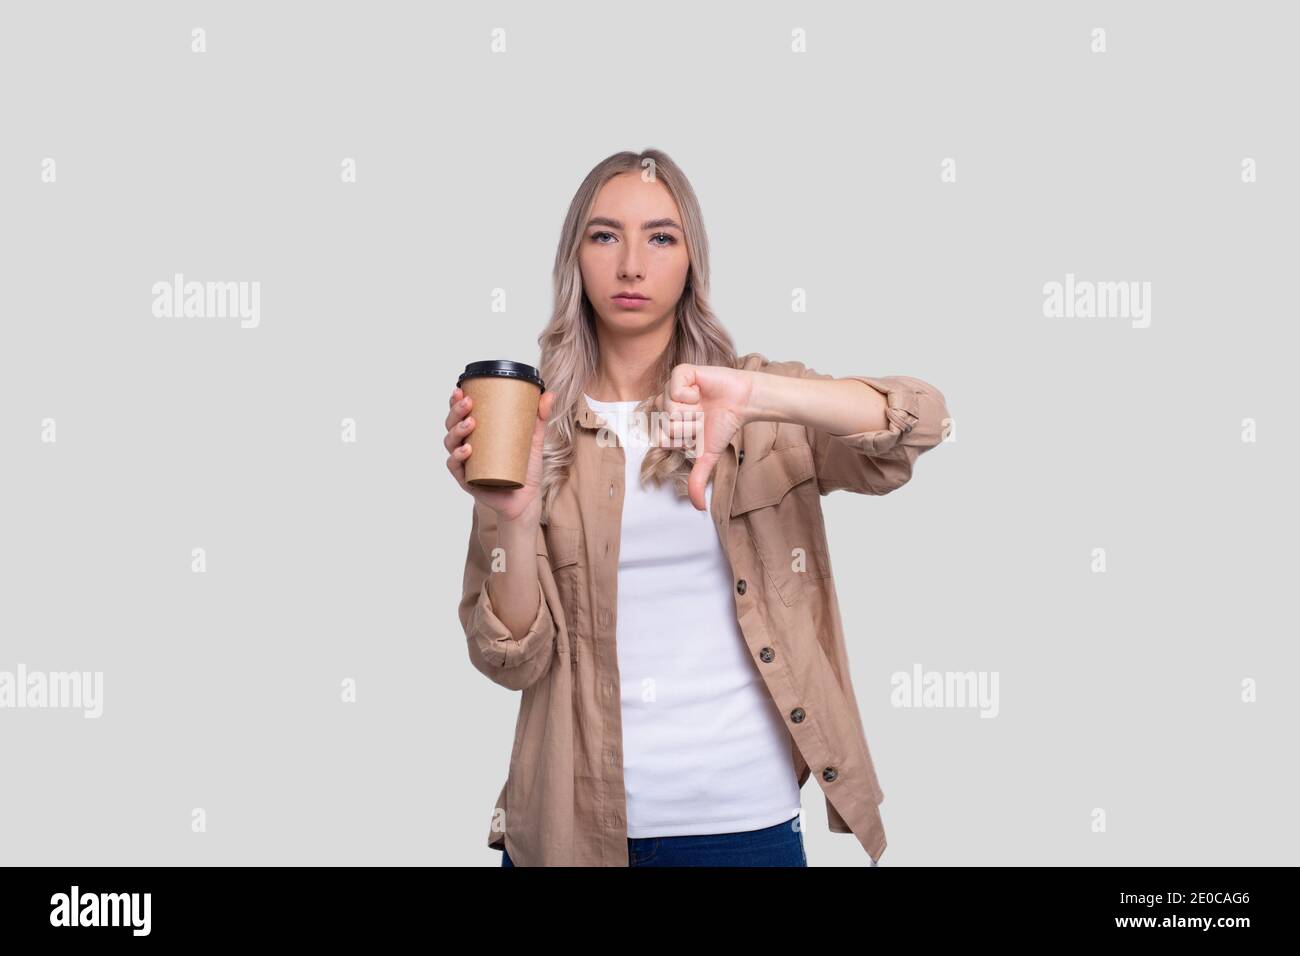 Girl Holding Take Away Coffee Cup Showing Thumb Down. Girl With To Go Coffee Cup in Hands. Stock Photo